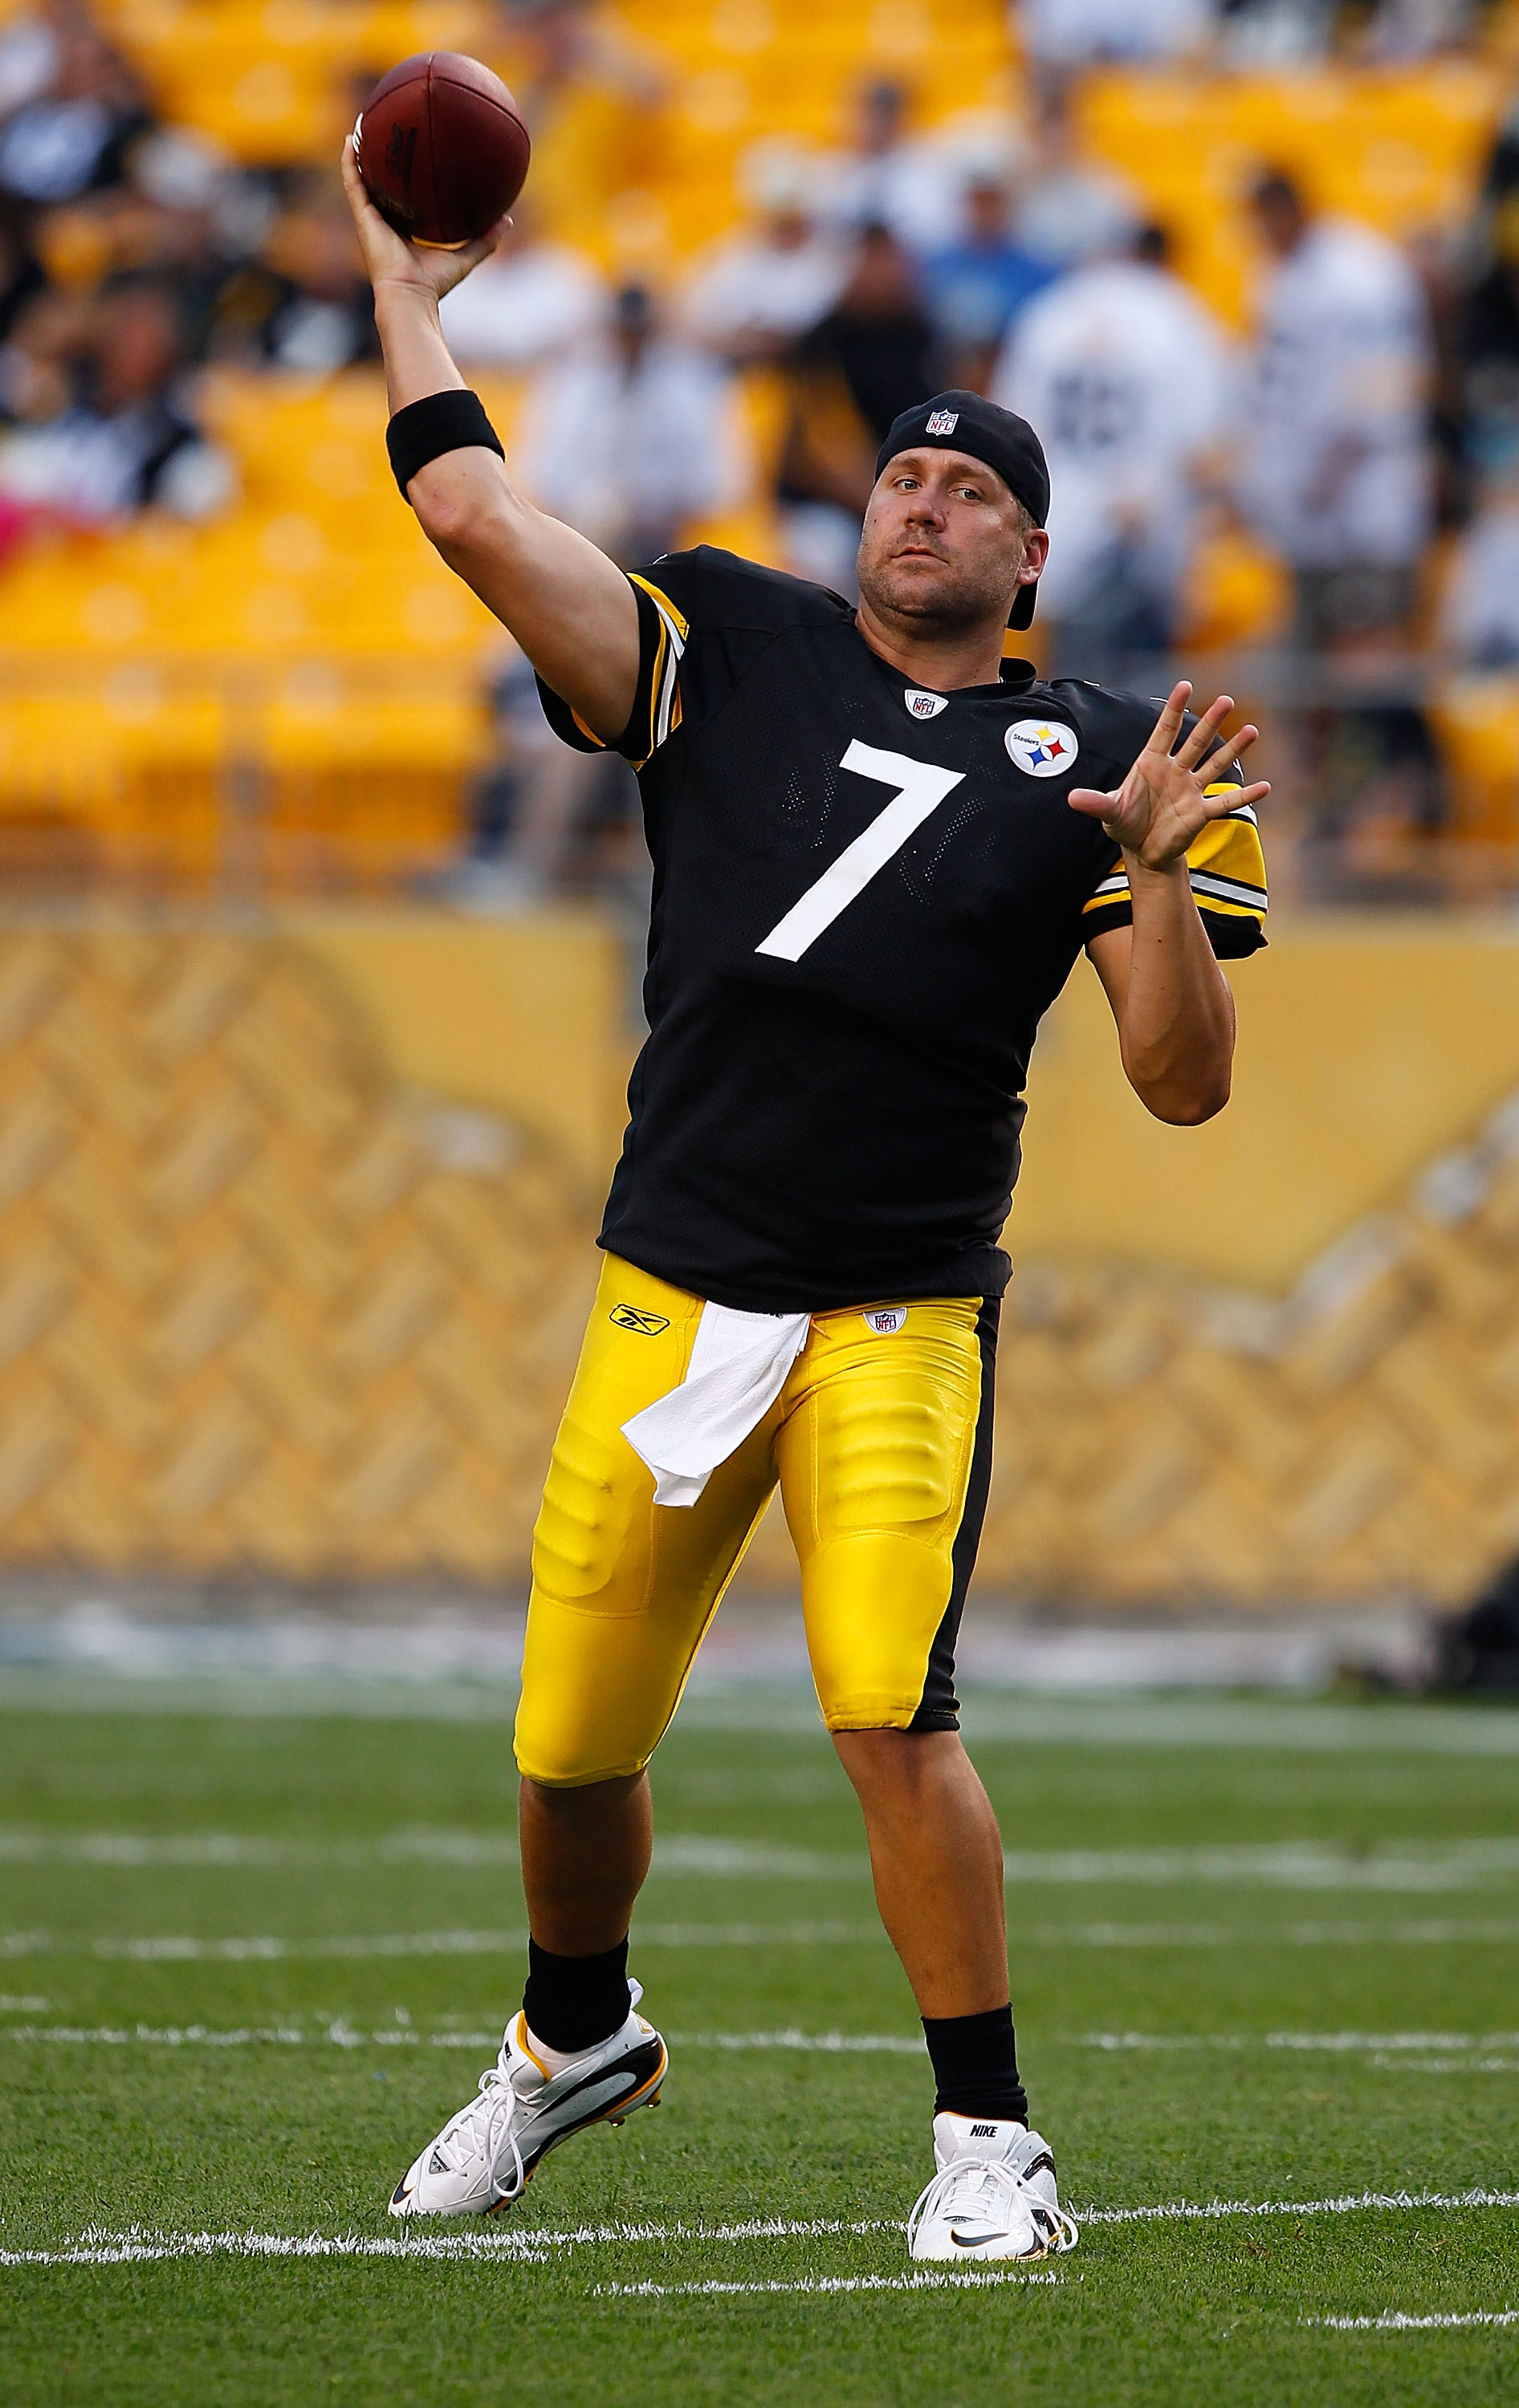 PITTSBURGH - AUGUST 14:  Ben Roethlisberger #7 of the Pittsburgh Steelers warms up prior to the game against the Detroit Lions on August 14, 2010 at Heinz Field in Pittsburgh, Pennsylvania.  (Photo by Jared Wickerham/Getty Images)